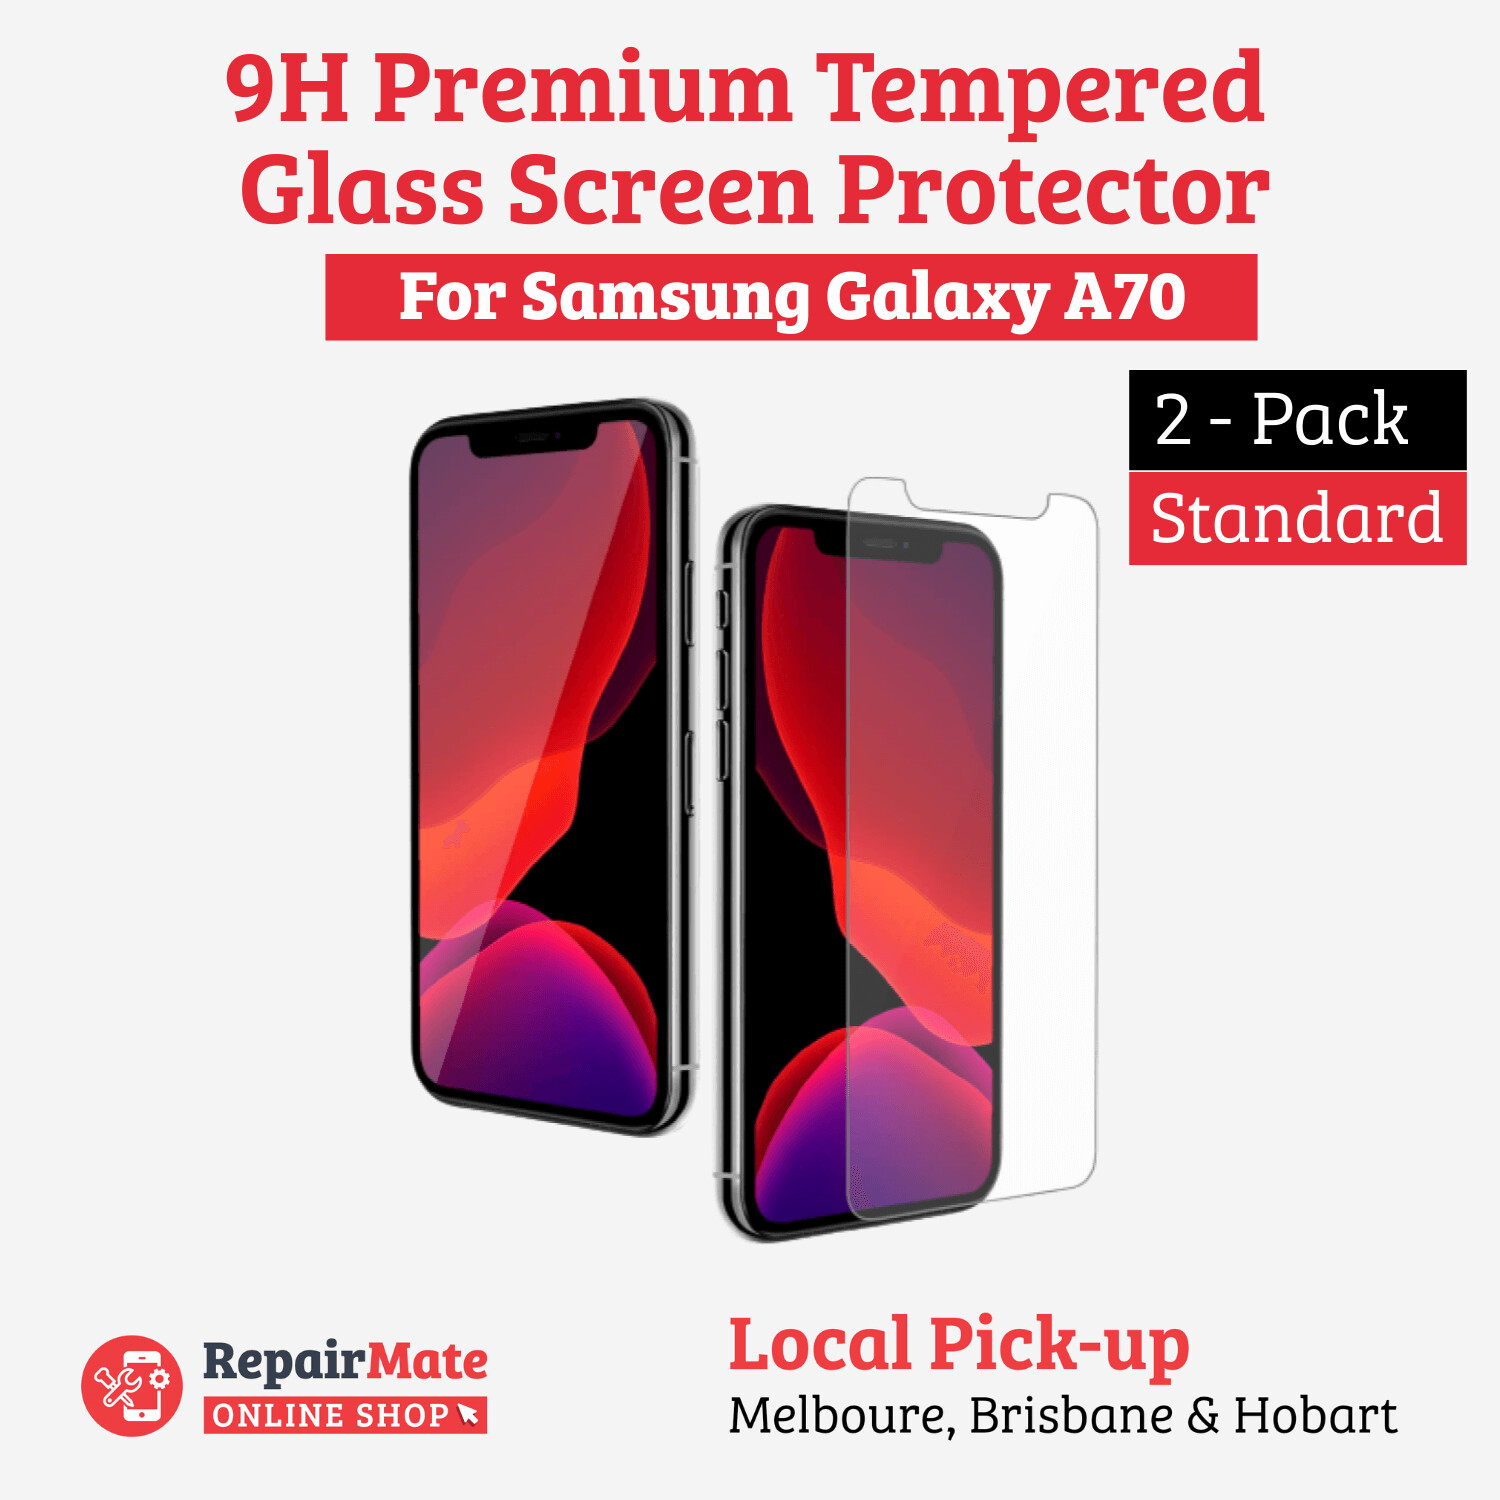 Samsung Galaxy A70 9H Premium Tempered Glass Screen Protector [2 Pack]